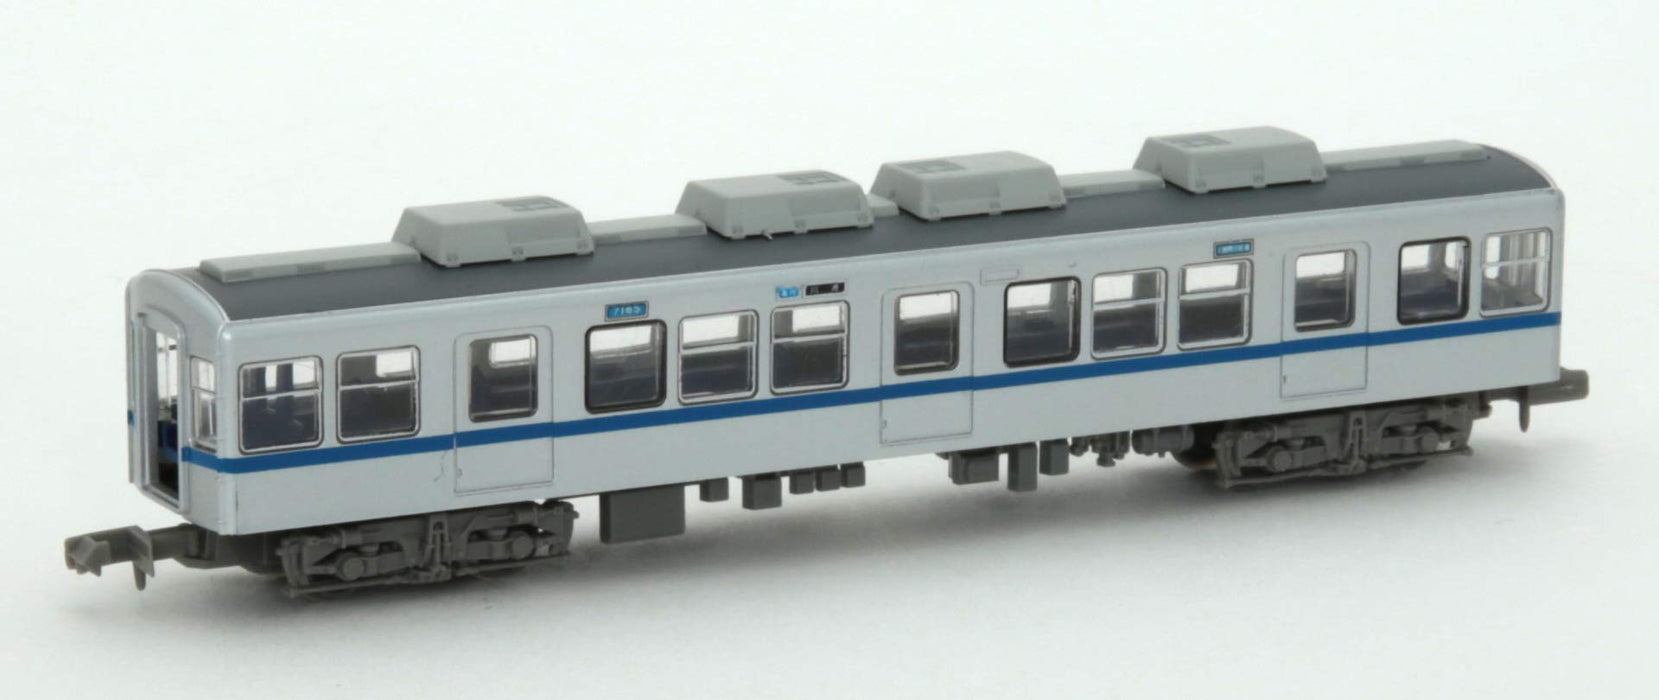 Tomytec Railway Collection Hokuso Type 7150 Diorama à 4 voitures Production limitée